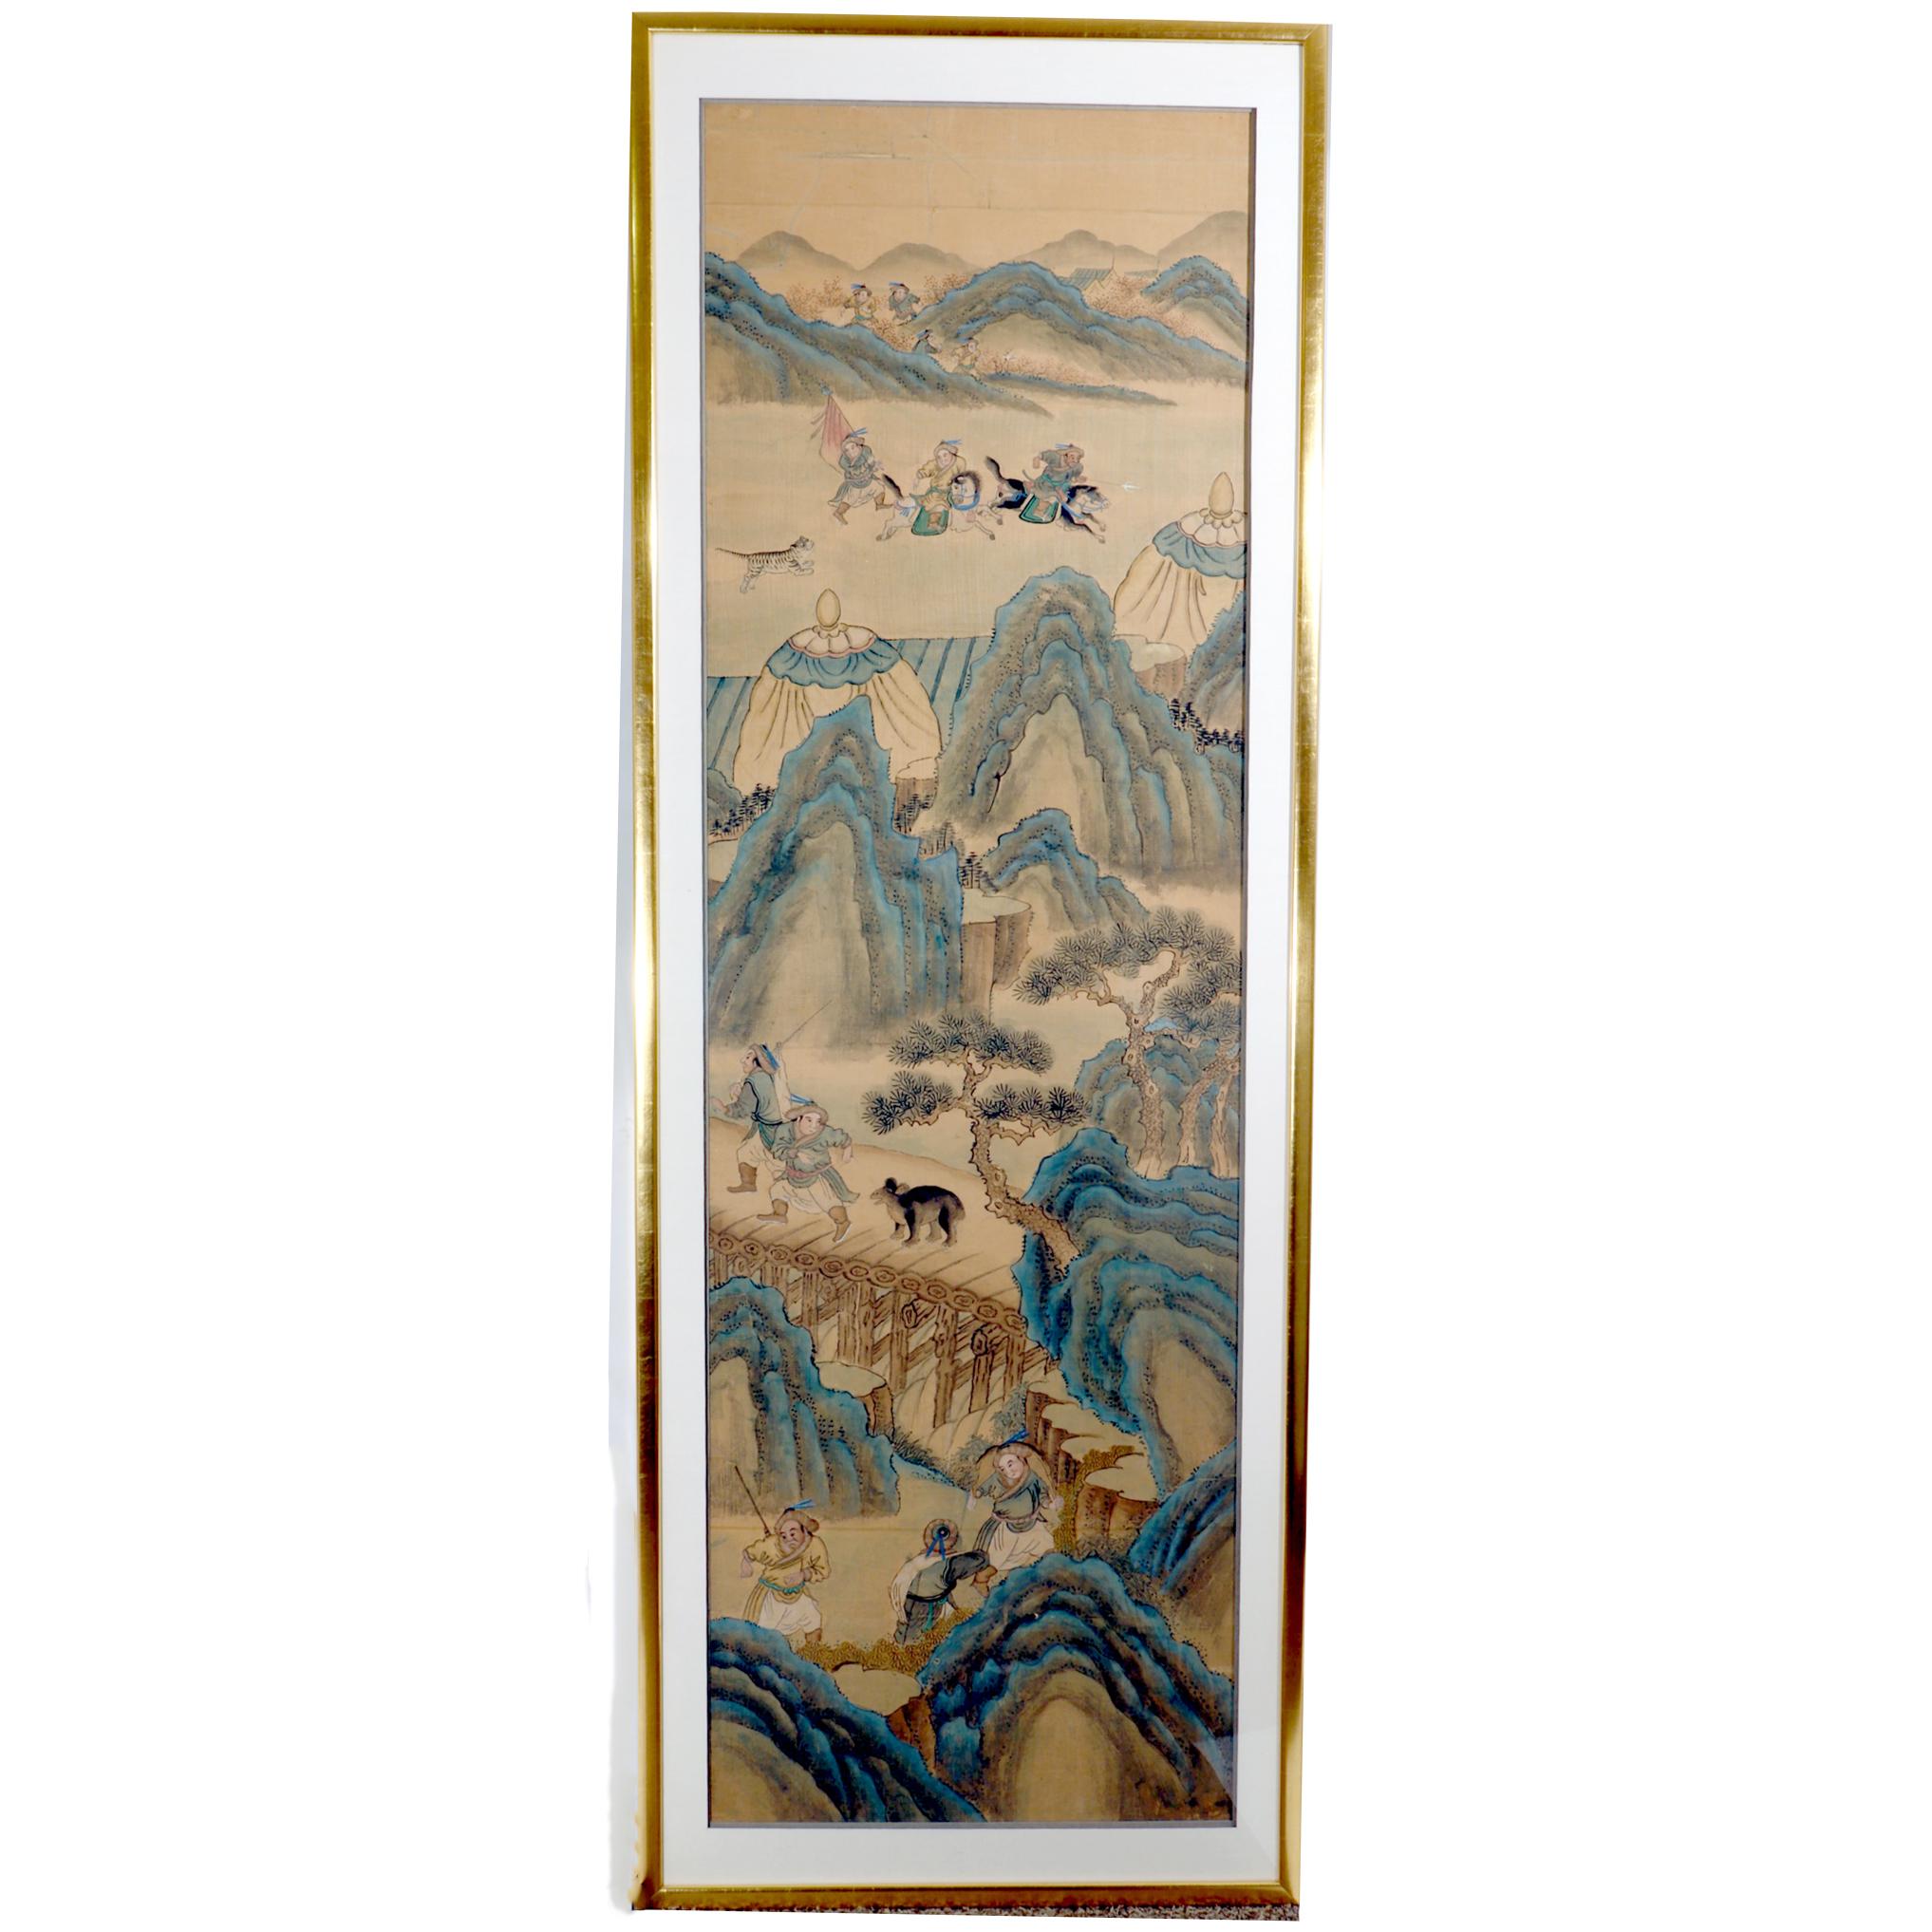 Chinese Large Ink Paintings on Silk with Huntsmen,
Mid-19th century

The set of four large framed painting each depict different complex pictures. The paintings are executed in a bold and expressive style, with rich blacks and bold brushstrokes.